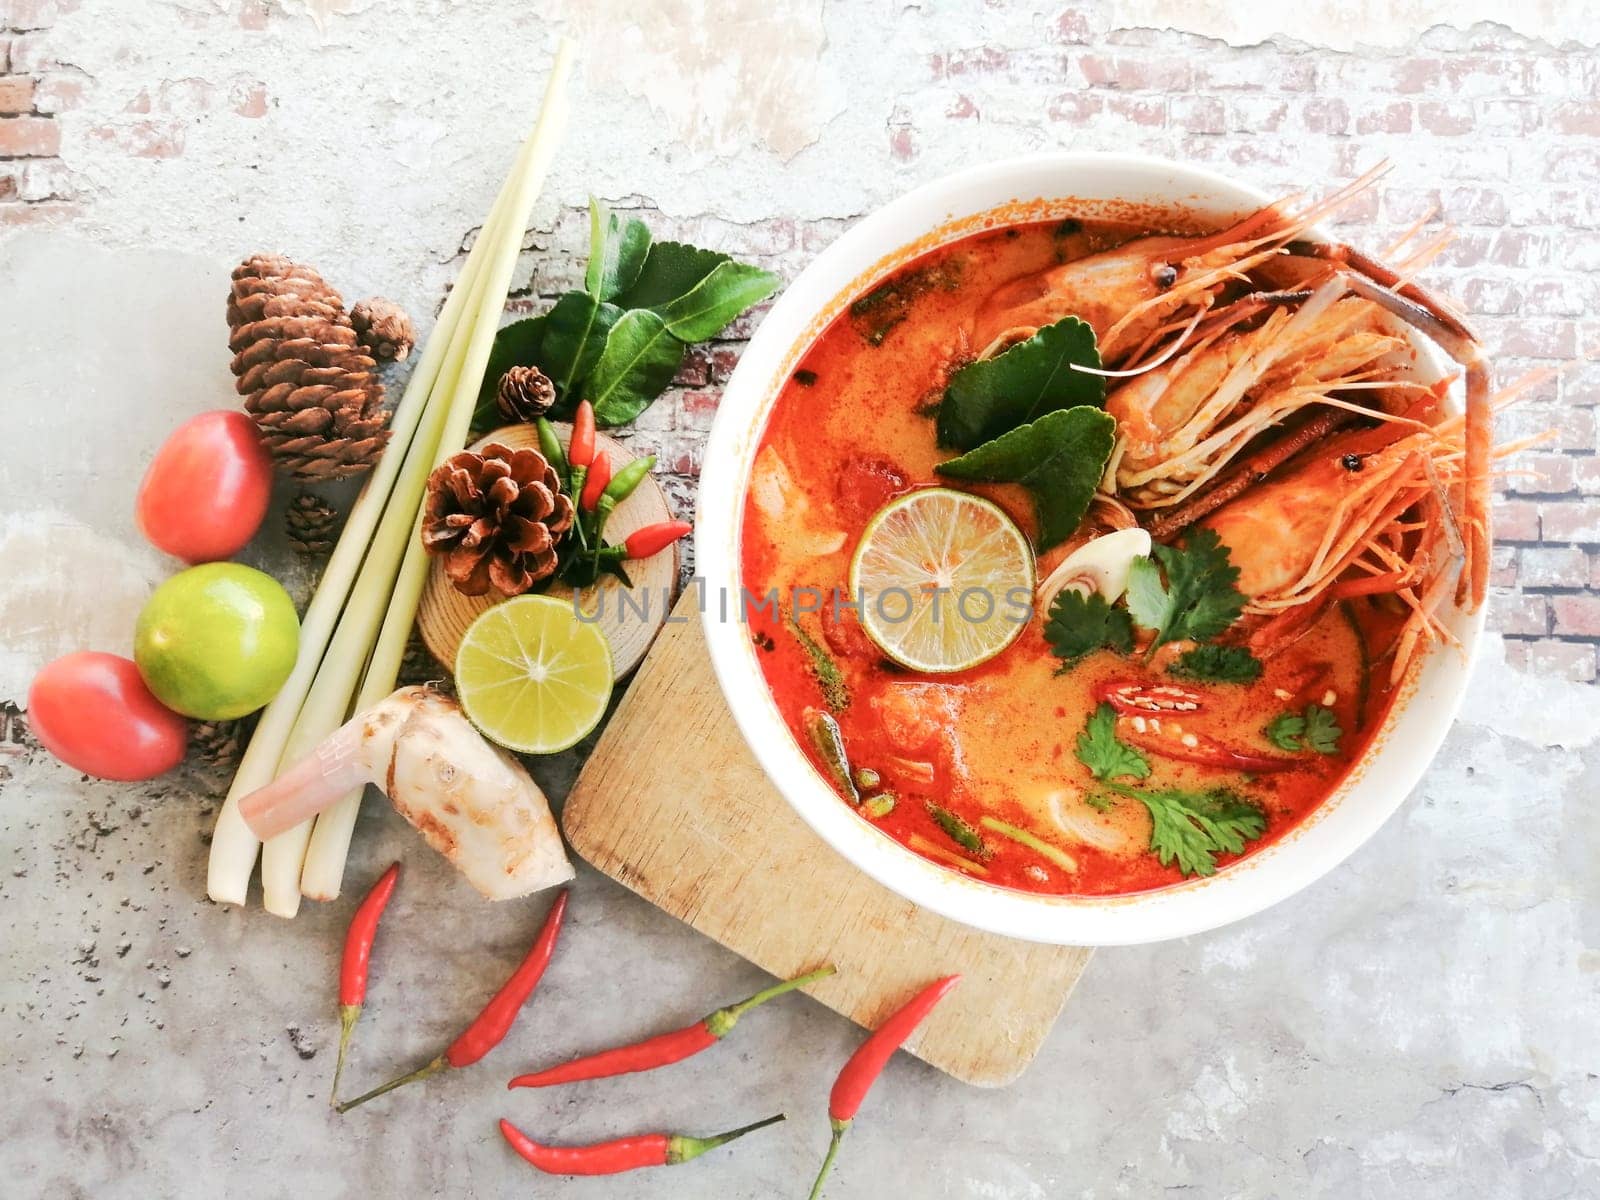 Tom Yum Goong is a famous Thai food all over the world (Tom Yum Kung River).